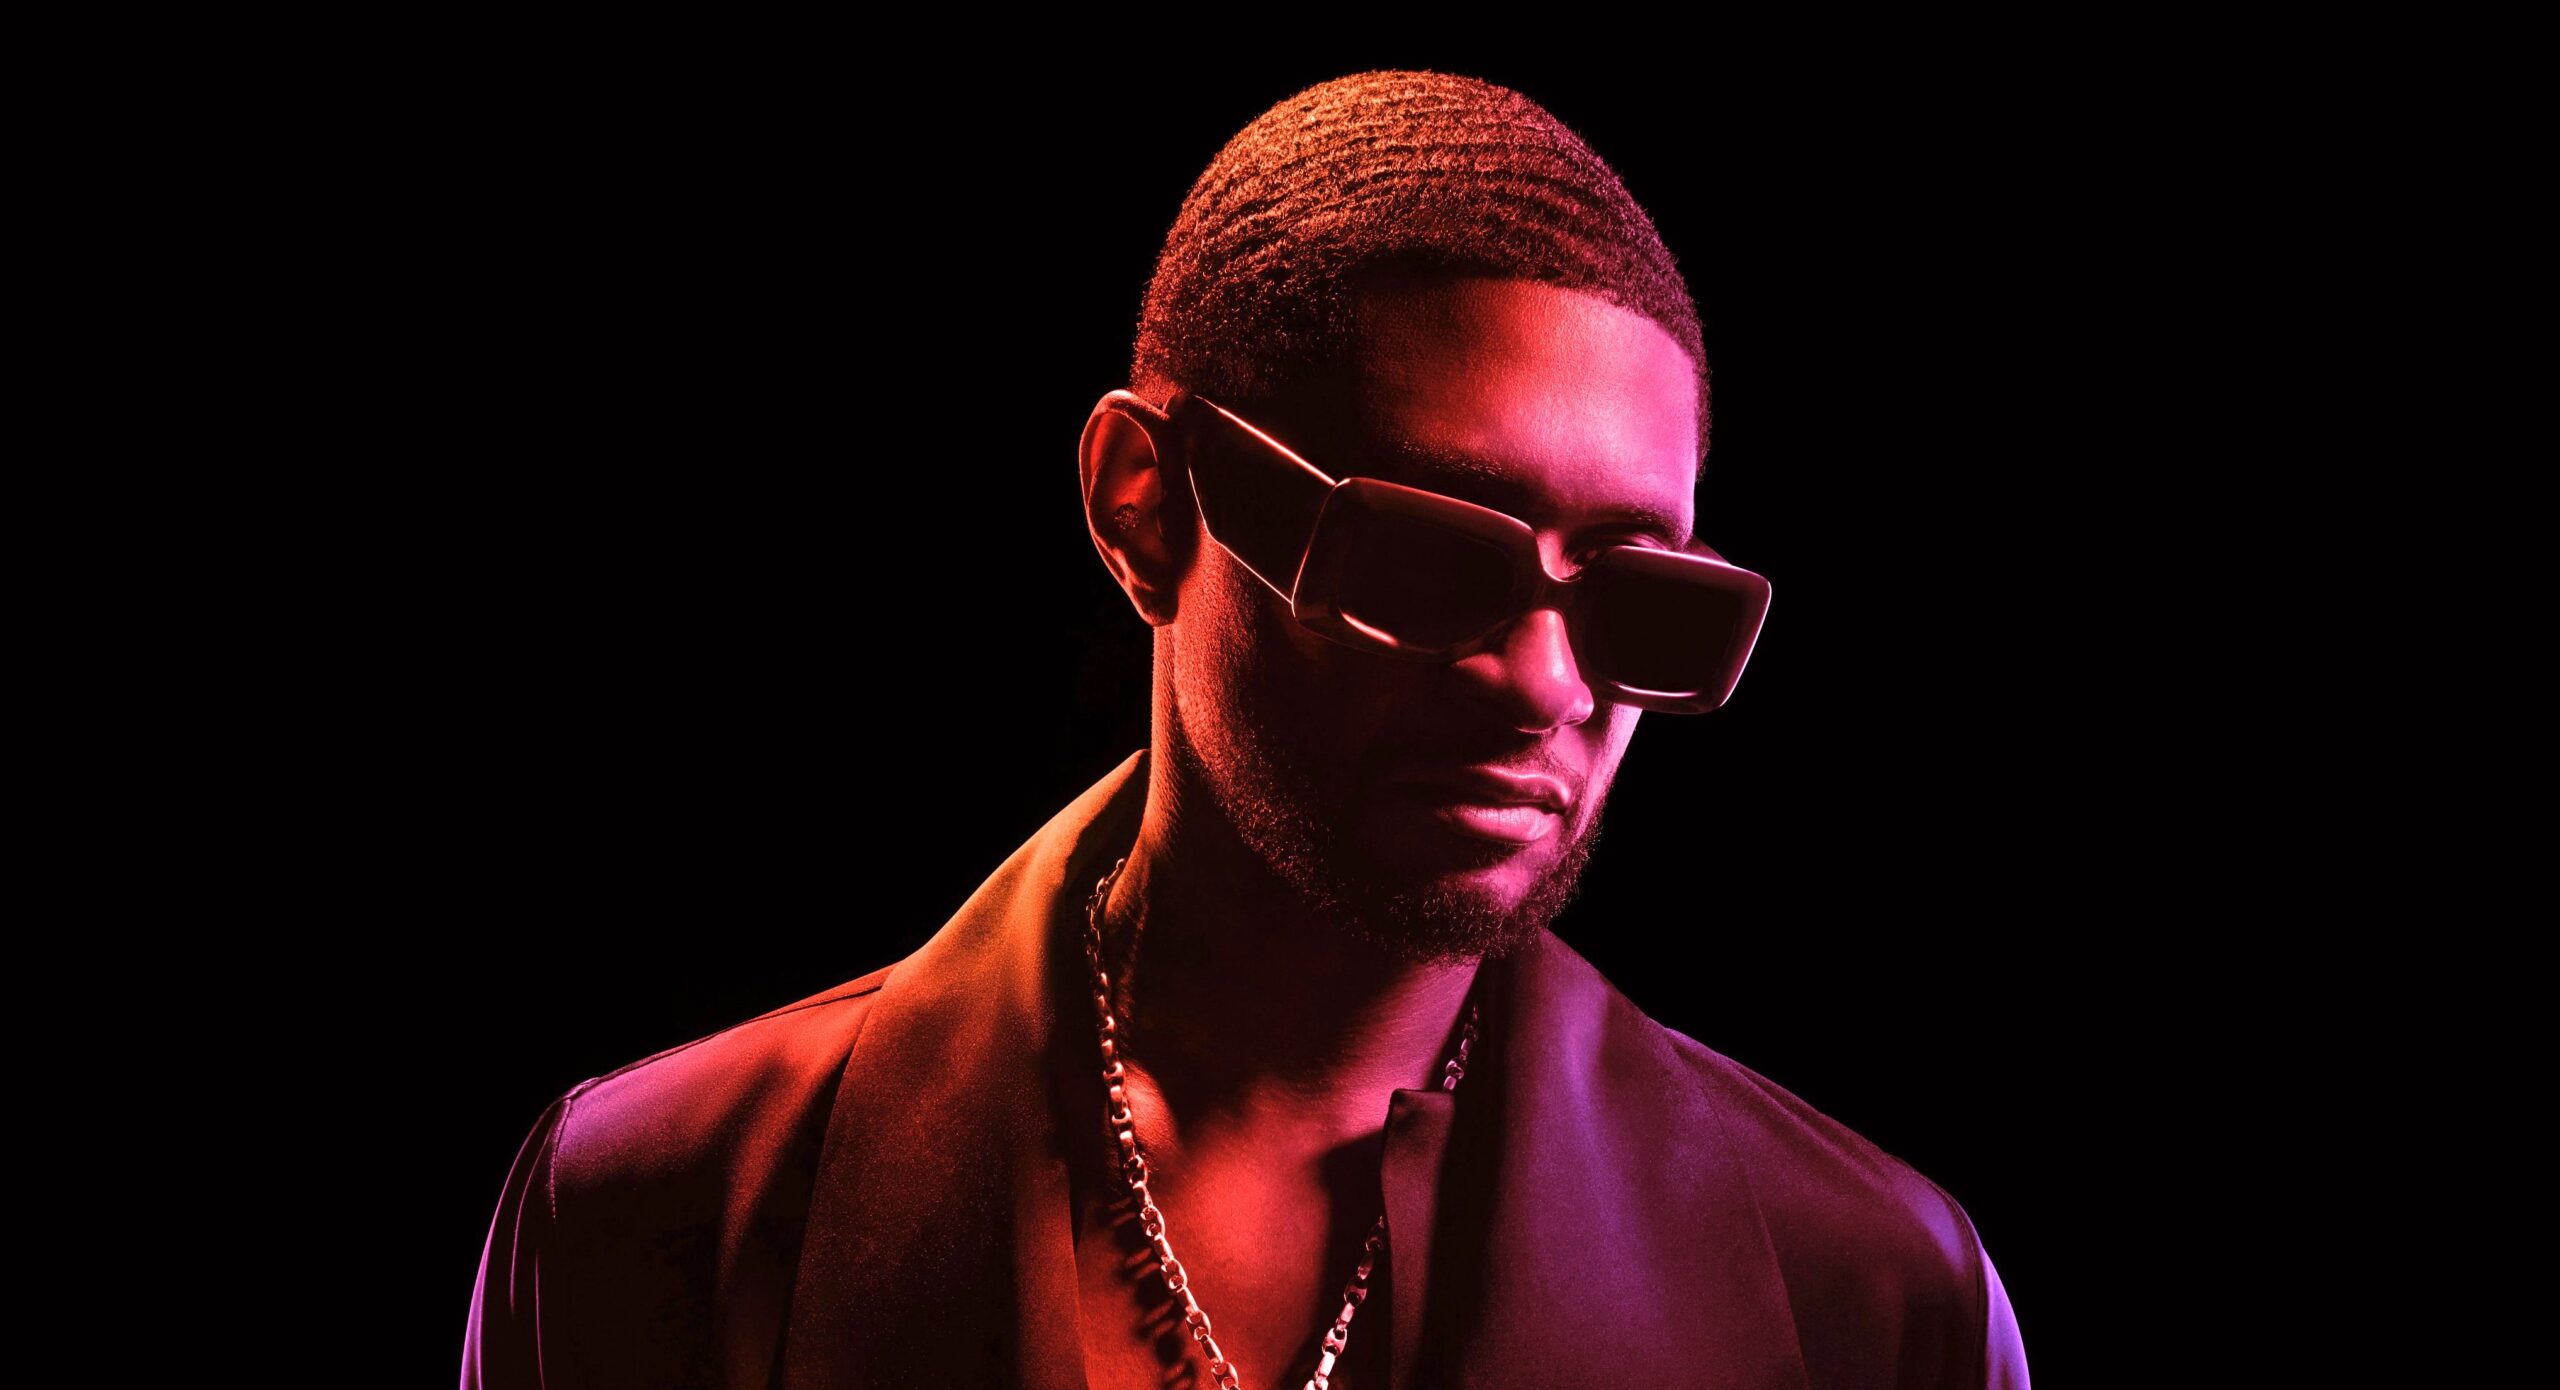 Usher Adds More Dates to UK & Europe Leg of the ‘Past Present Future’ Tour After Multiple SOLD OUT Shows